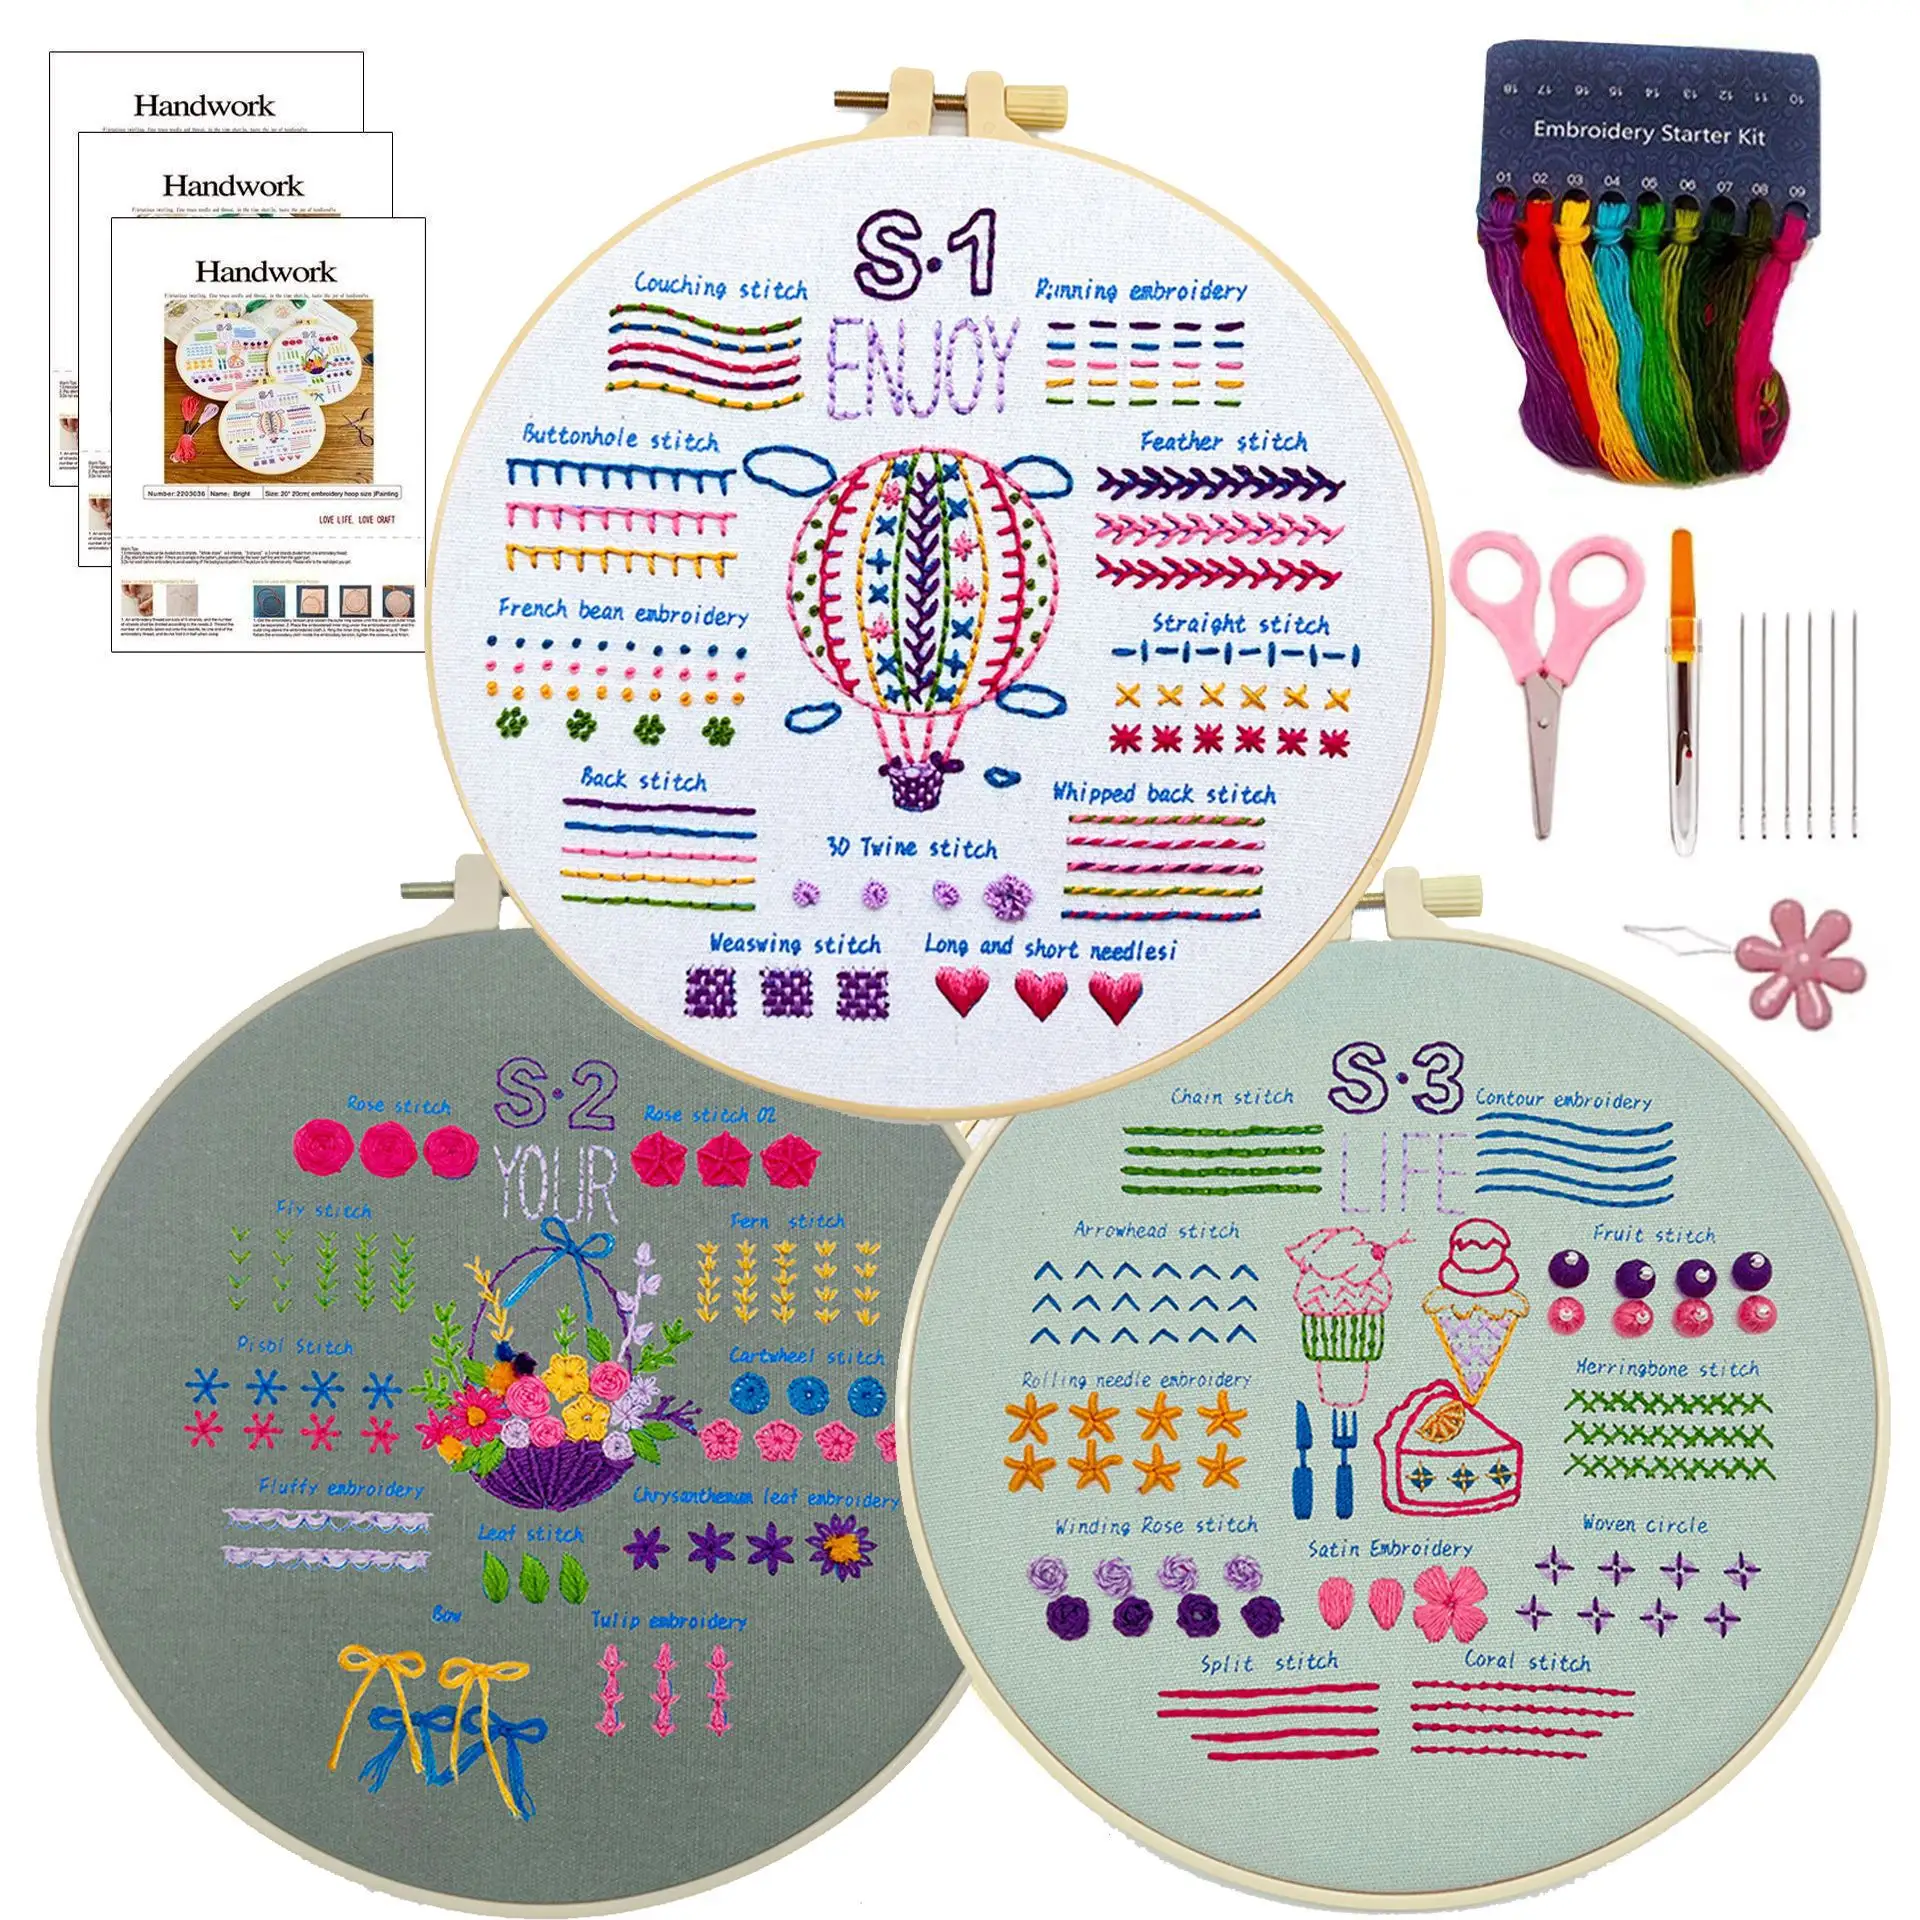 DIY Embroidery Starter Kit for Adults Beginners Cross Stitch Embroidery Kit Printed Cloth diy Kit With Hoop